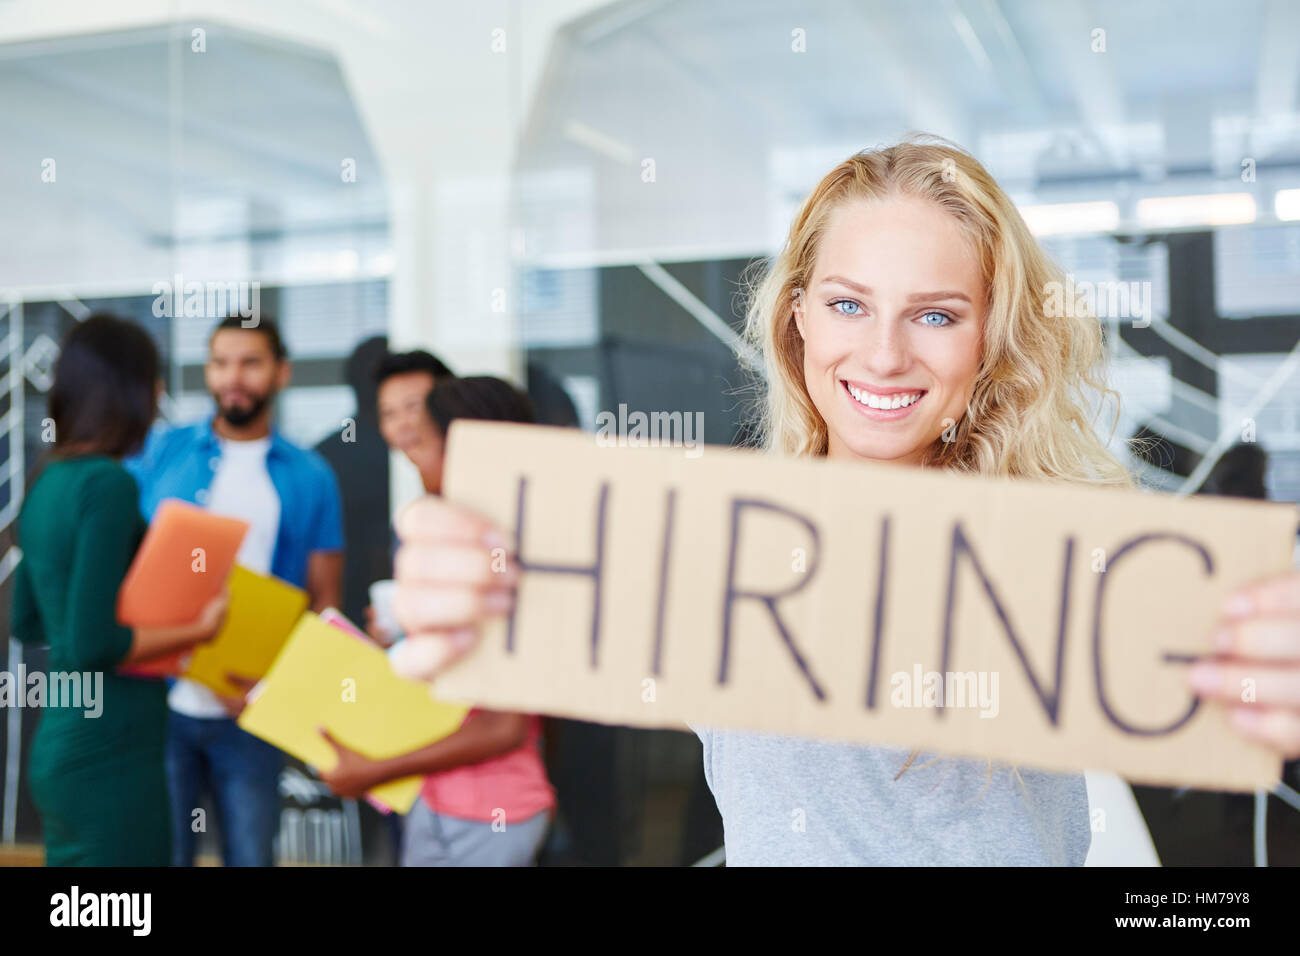 Woman in start-up holding sign as hiring advertising Stock Photo